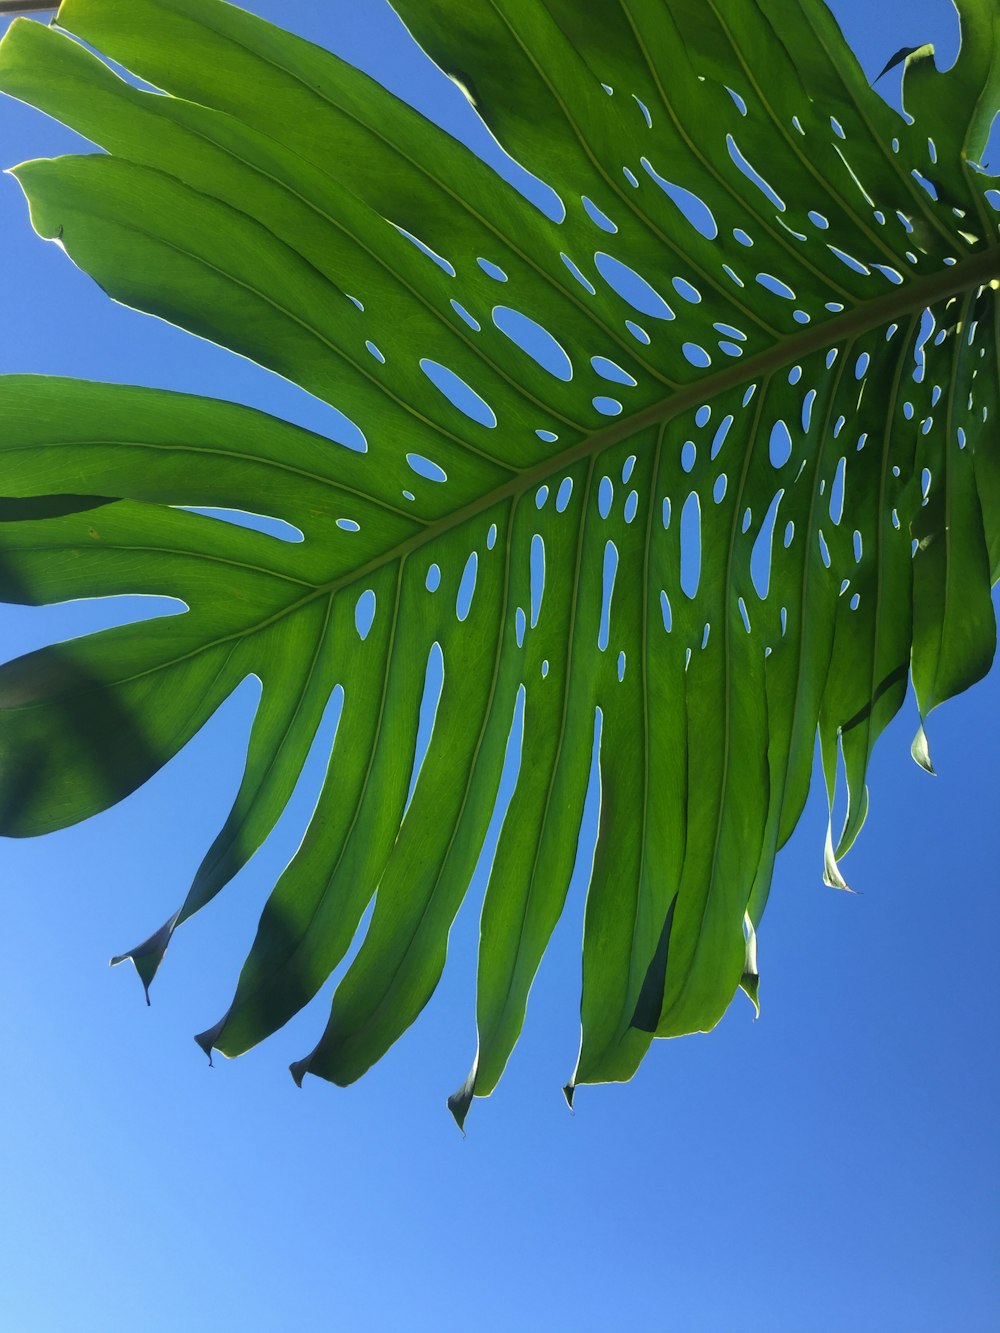 a close up of a green leaf against a blue sky